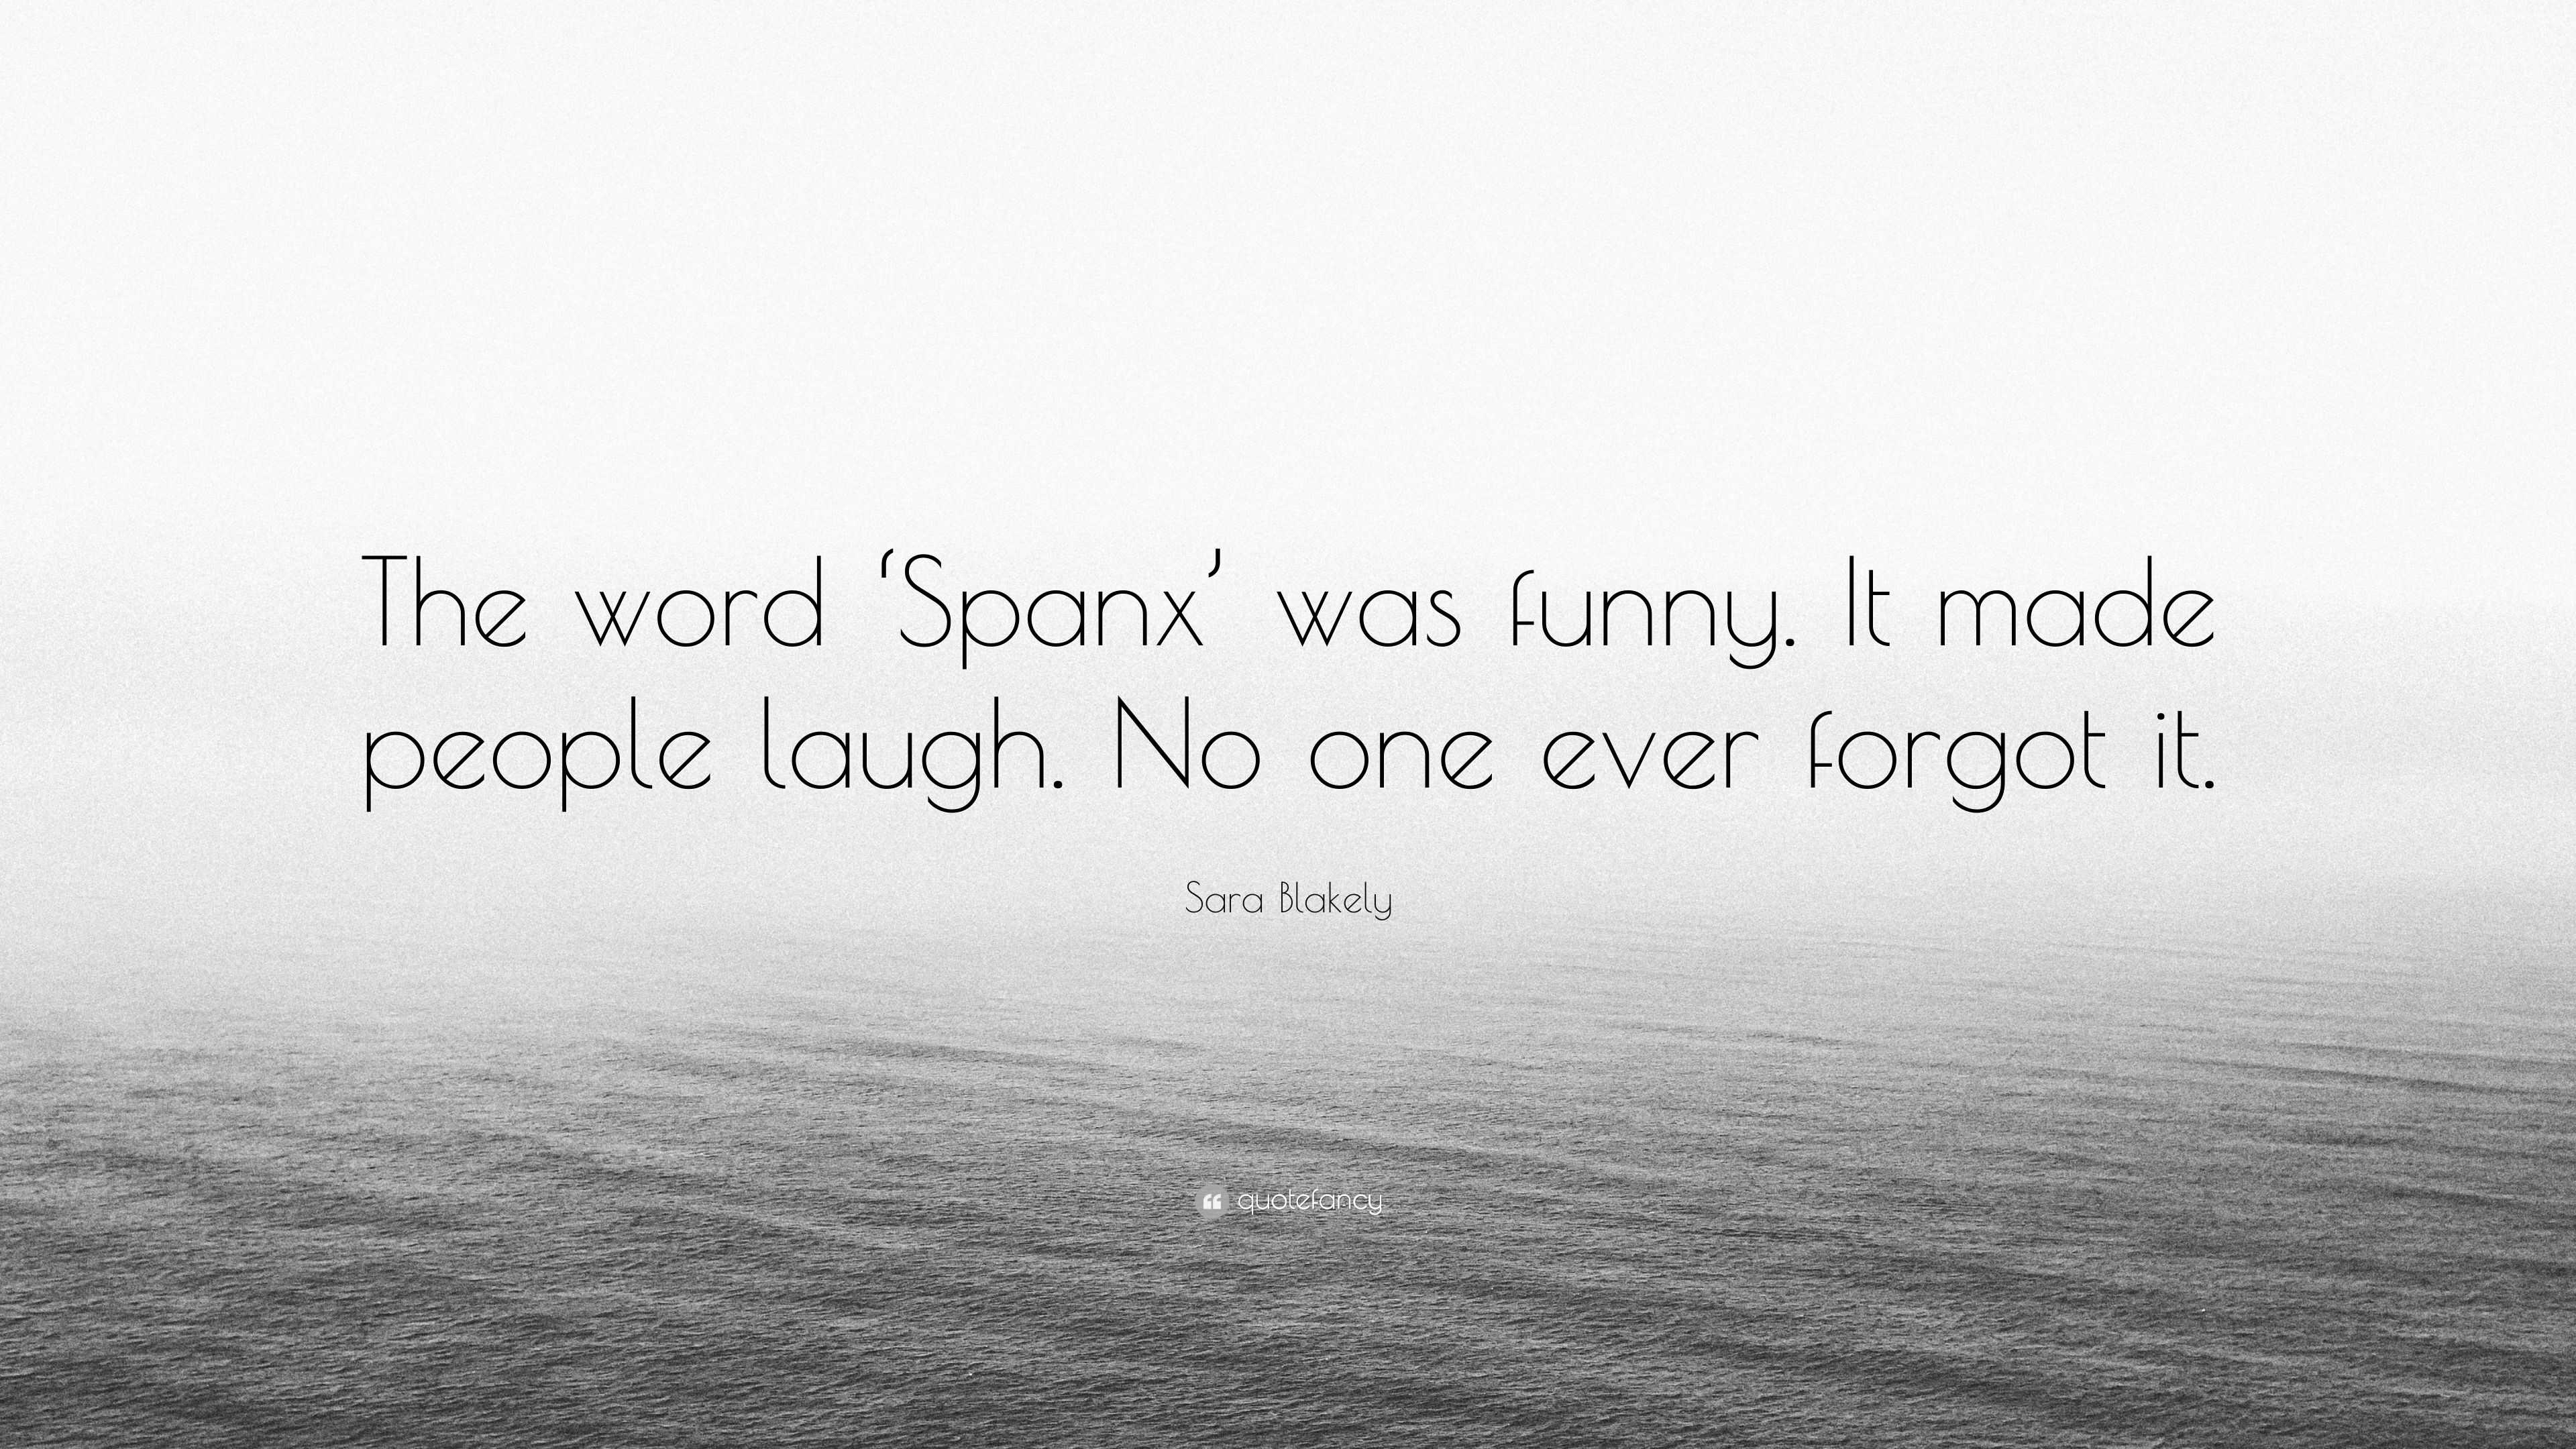 Sara Blakely Quote: “The word 'Spanx' was funny. It made people